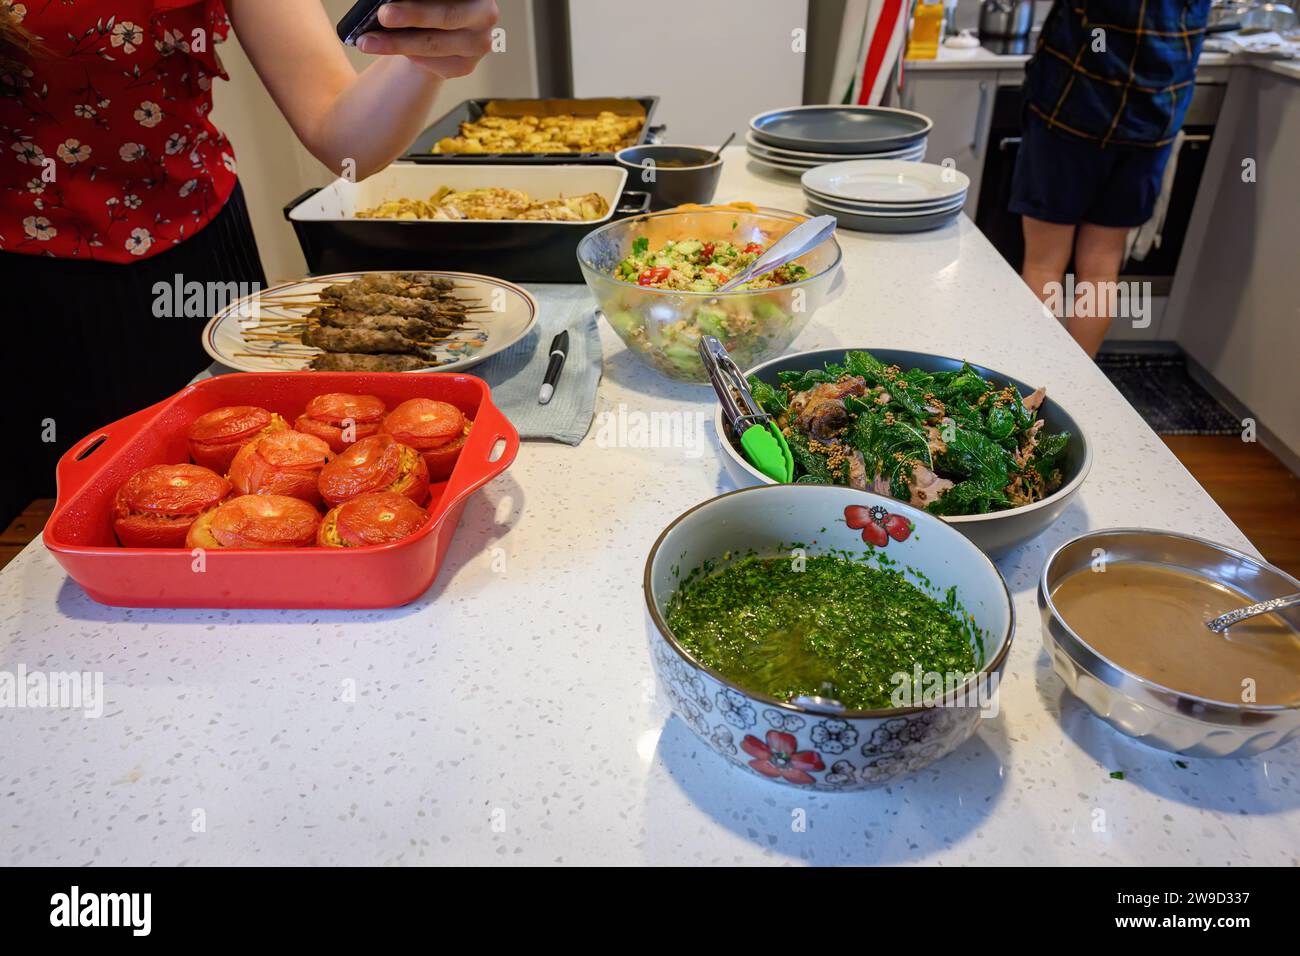 Woman holding a smartphone taking photos of festival food on the kitchen benchtop. Home cooking and entertainment concept. Stock Photo